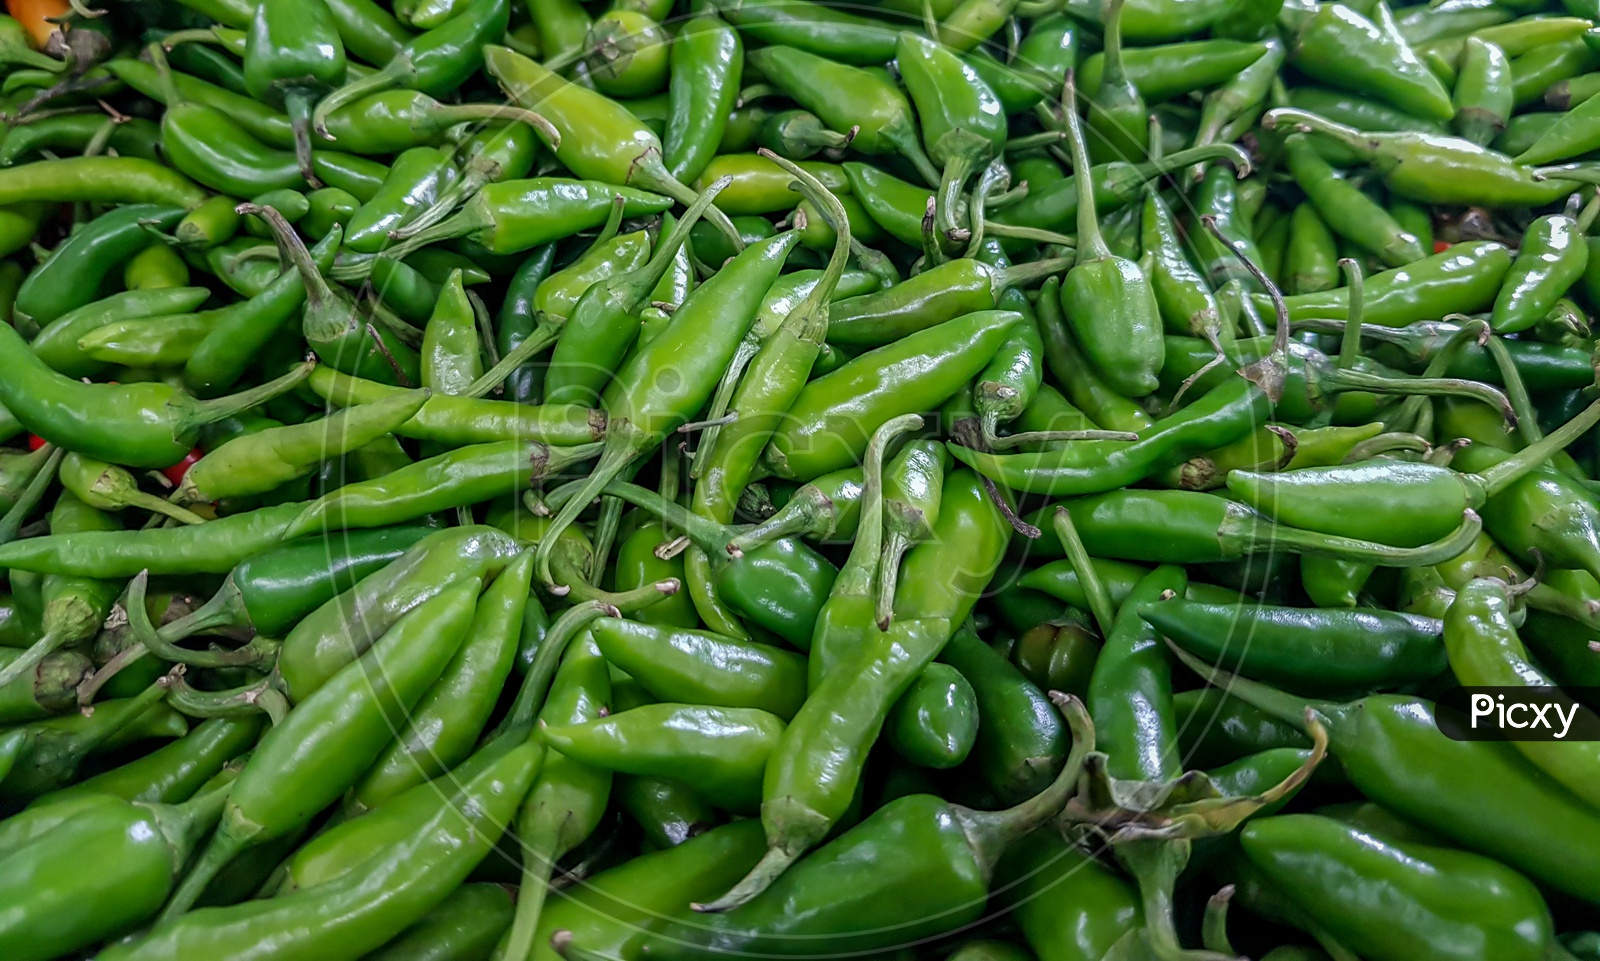 Green Chillis Fresh Ready To Be Sold In Vegetable Market